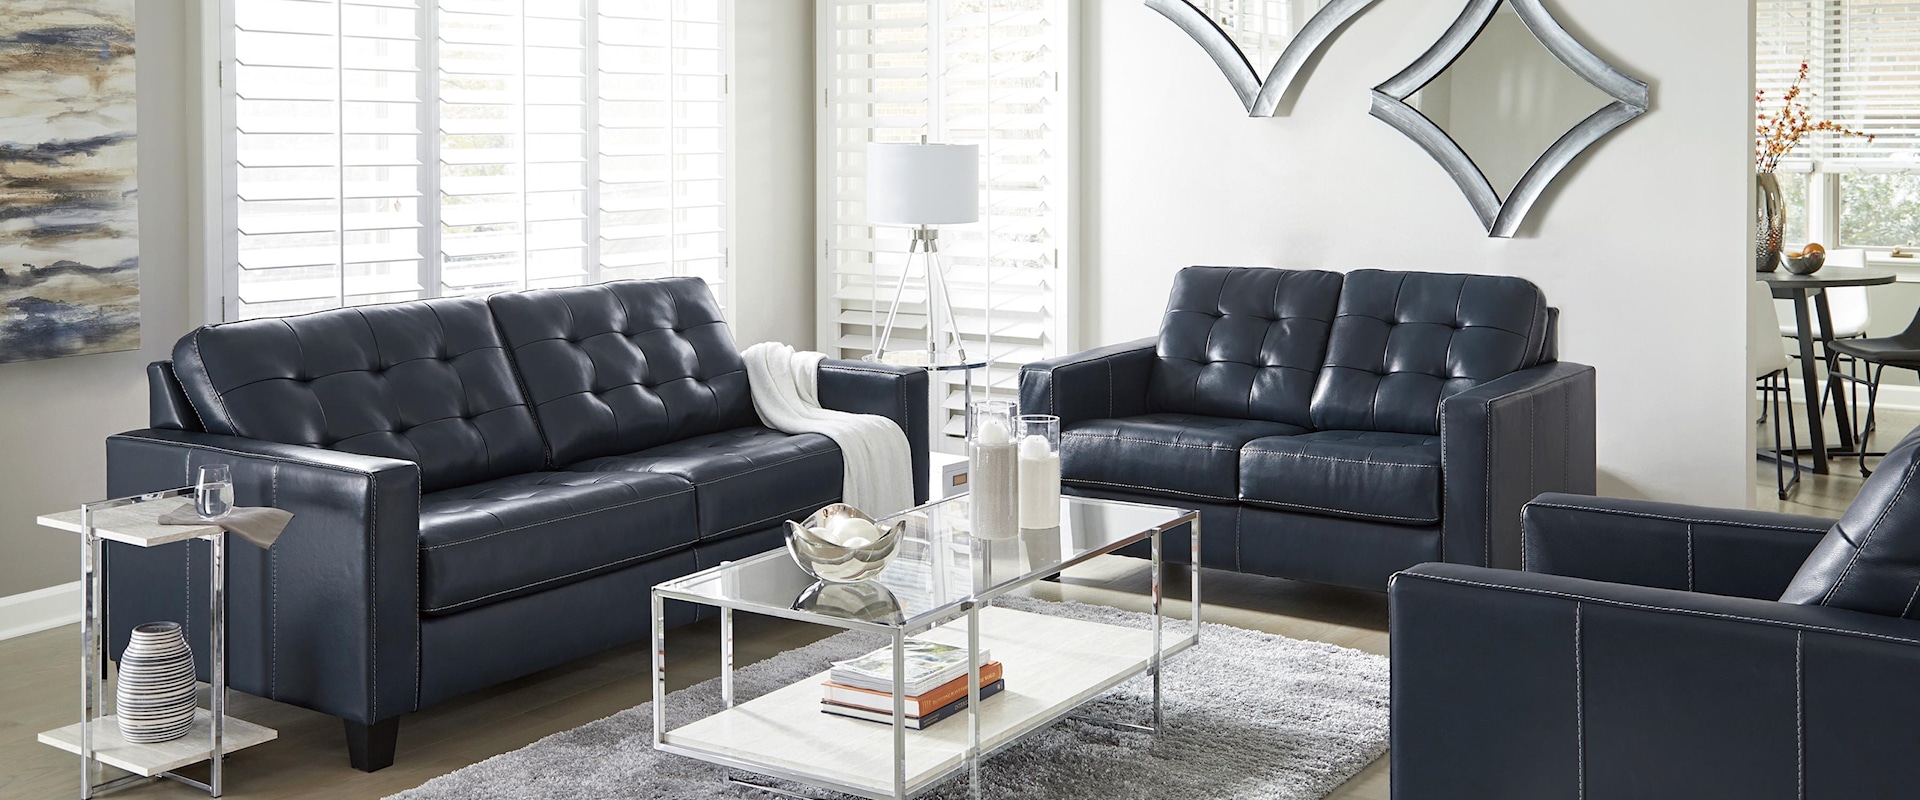 3 Piece Sofa, Loveseat and Chair Set